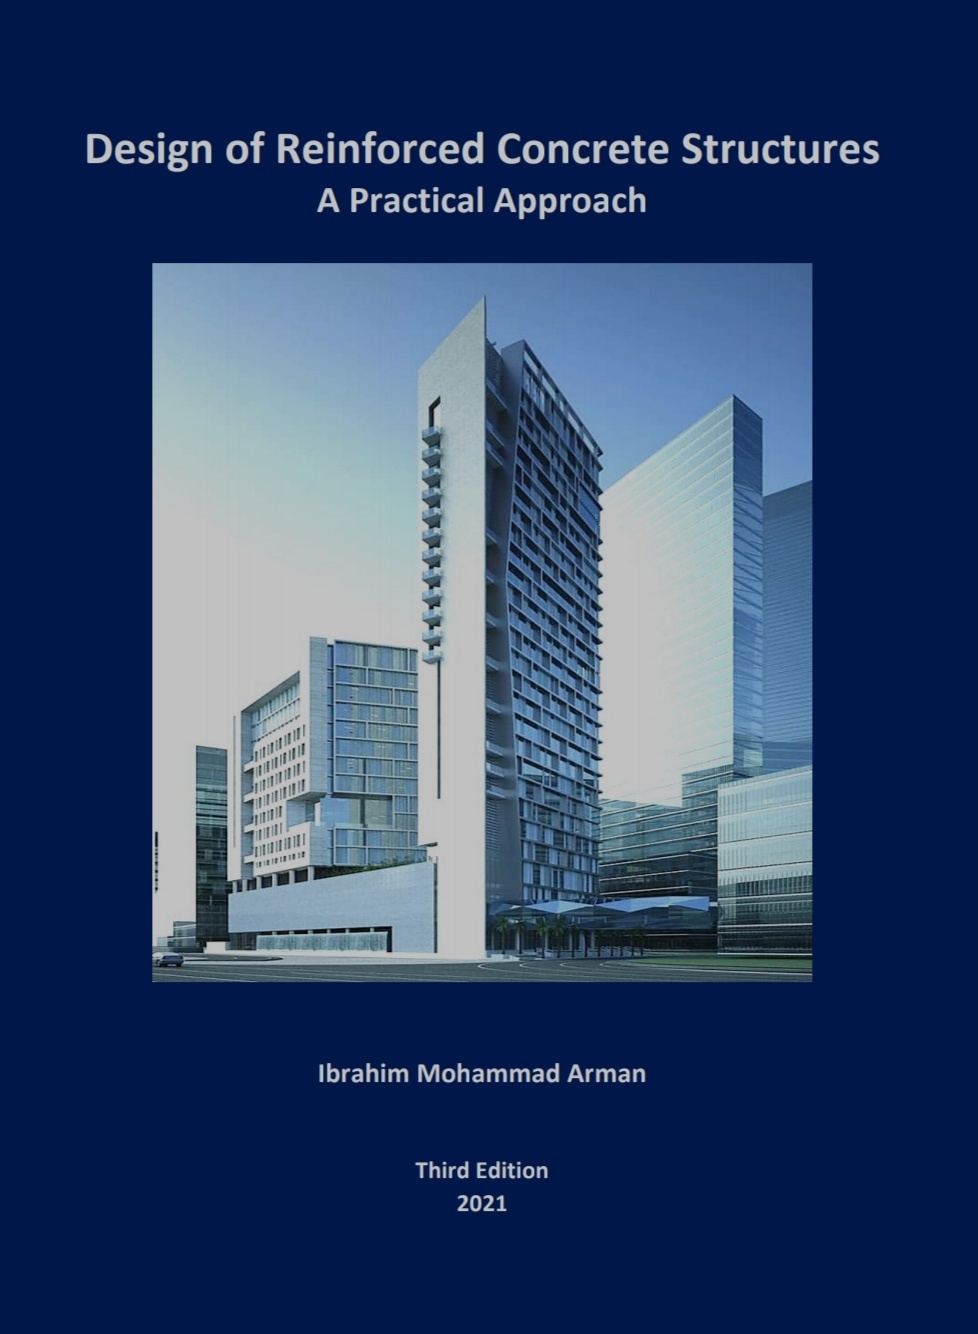 2021 Design of Reinforced Concrete Structures A Practical Approach Ibrahim Mohammad Arman (3rd Edition) 1